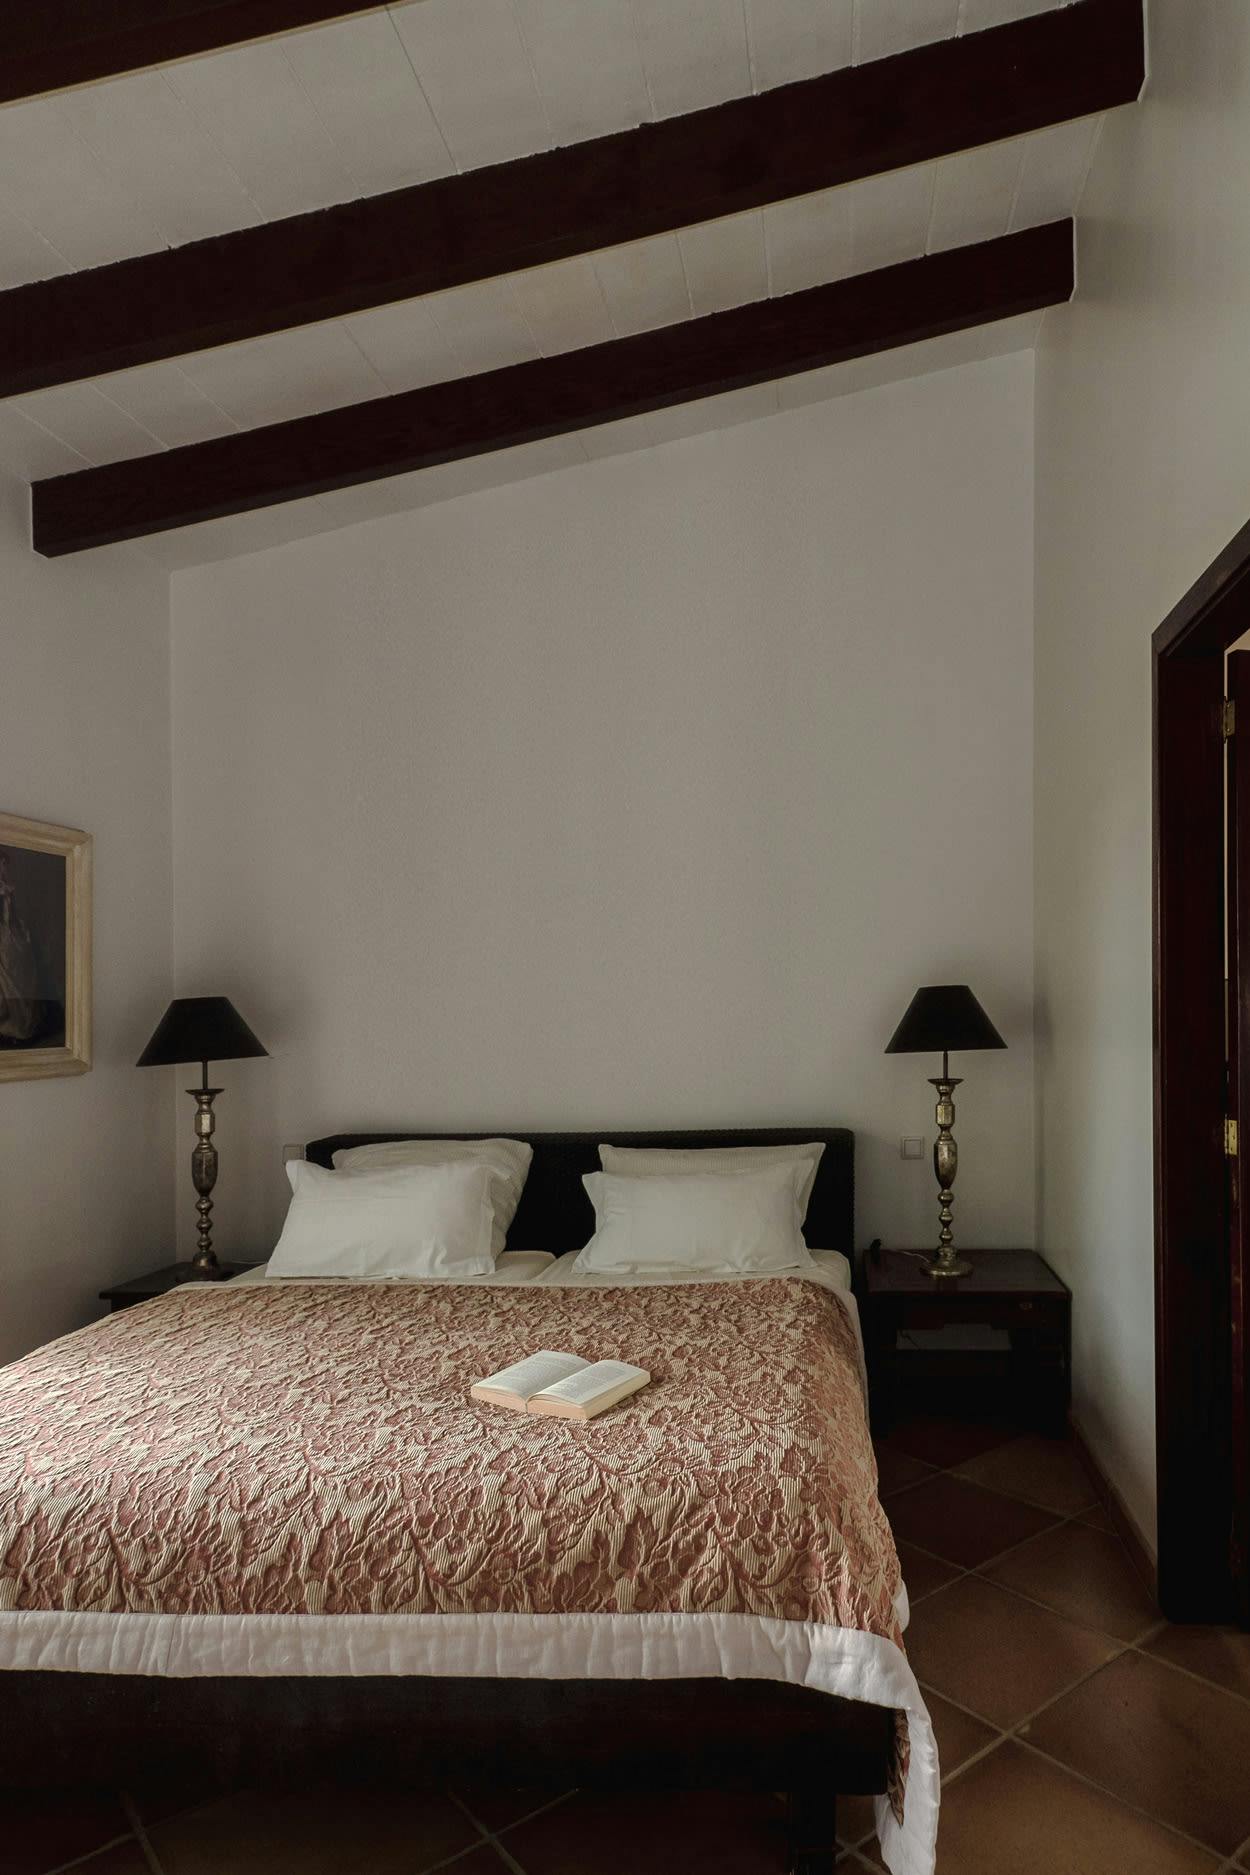 The image shows a bedroom with a neatly made bed, two lamps, a nightstand, and a chair.